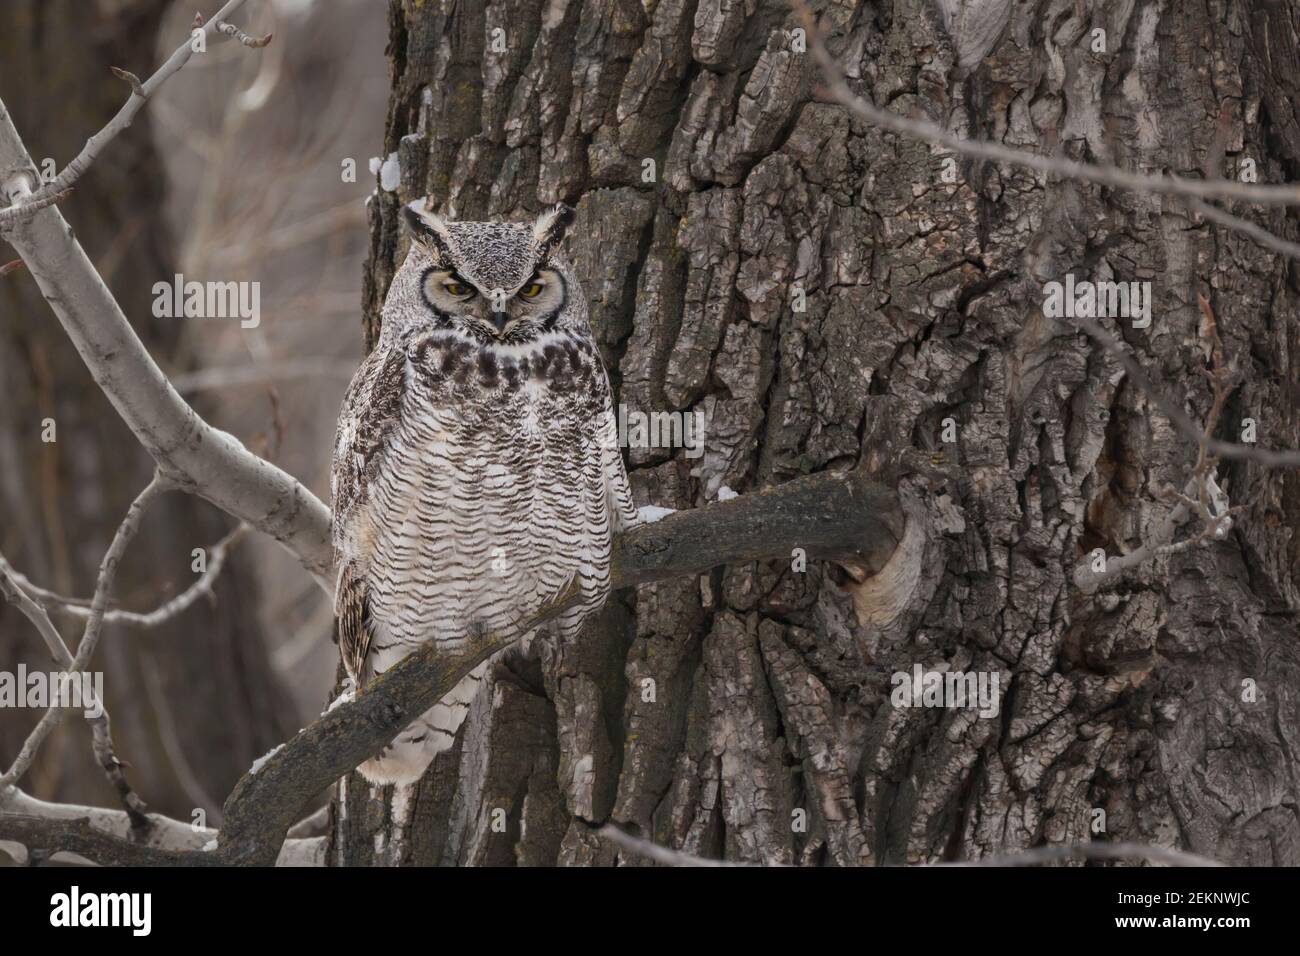 Great Horned Owl (Bubo virginianus) camouflaged against the bark of a tree during early spring, white and grey feathers and yellow eyes Stock Photo